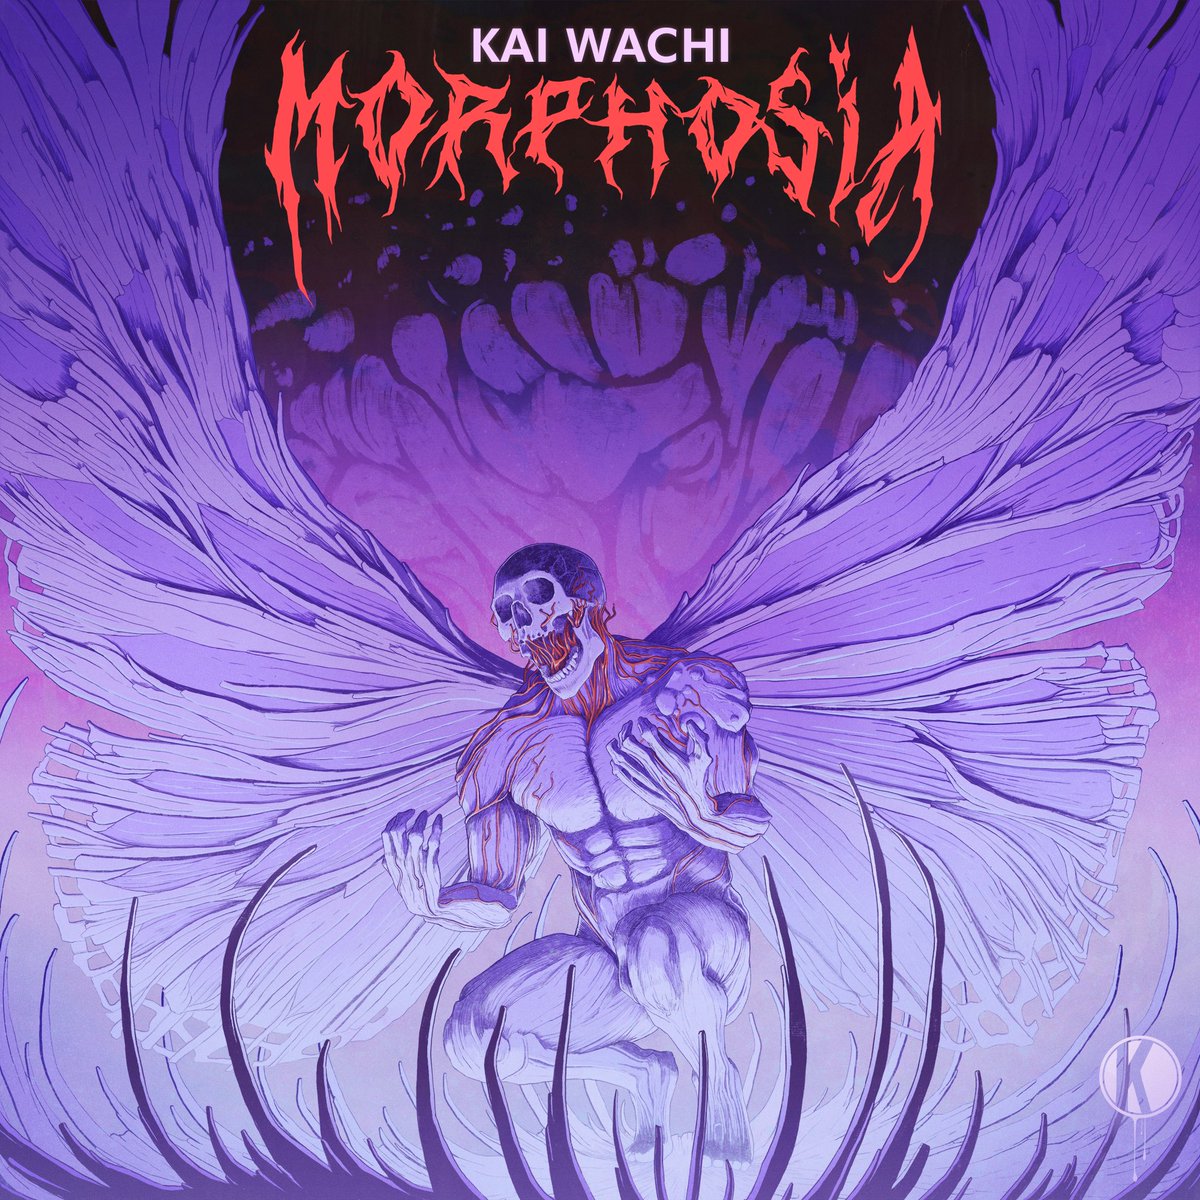 MORPHOSIA MY SECOND HEAVY-MELODIC BASED EP DROPS THIS FRIDAY FEEL LIKE IVE BEEN WORKING ON THIS FOR AN ETERNITY CANT WAIT FOR YOU GUYS TO HEAR IT ! 🫶🏼